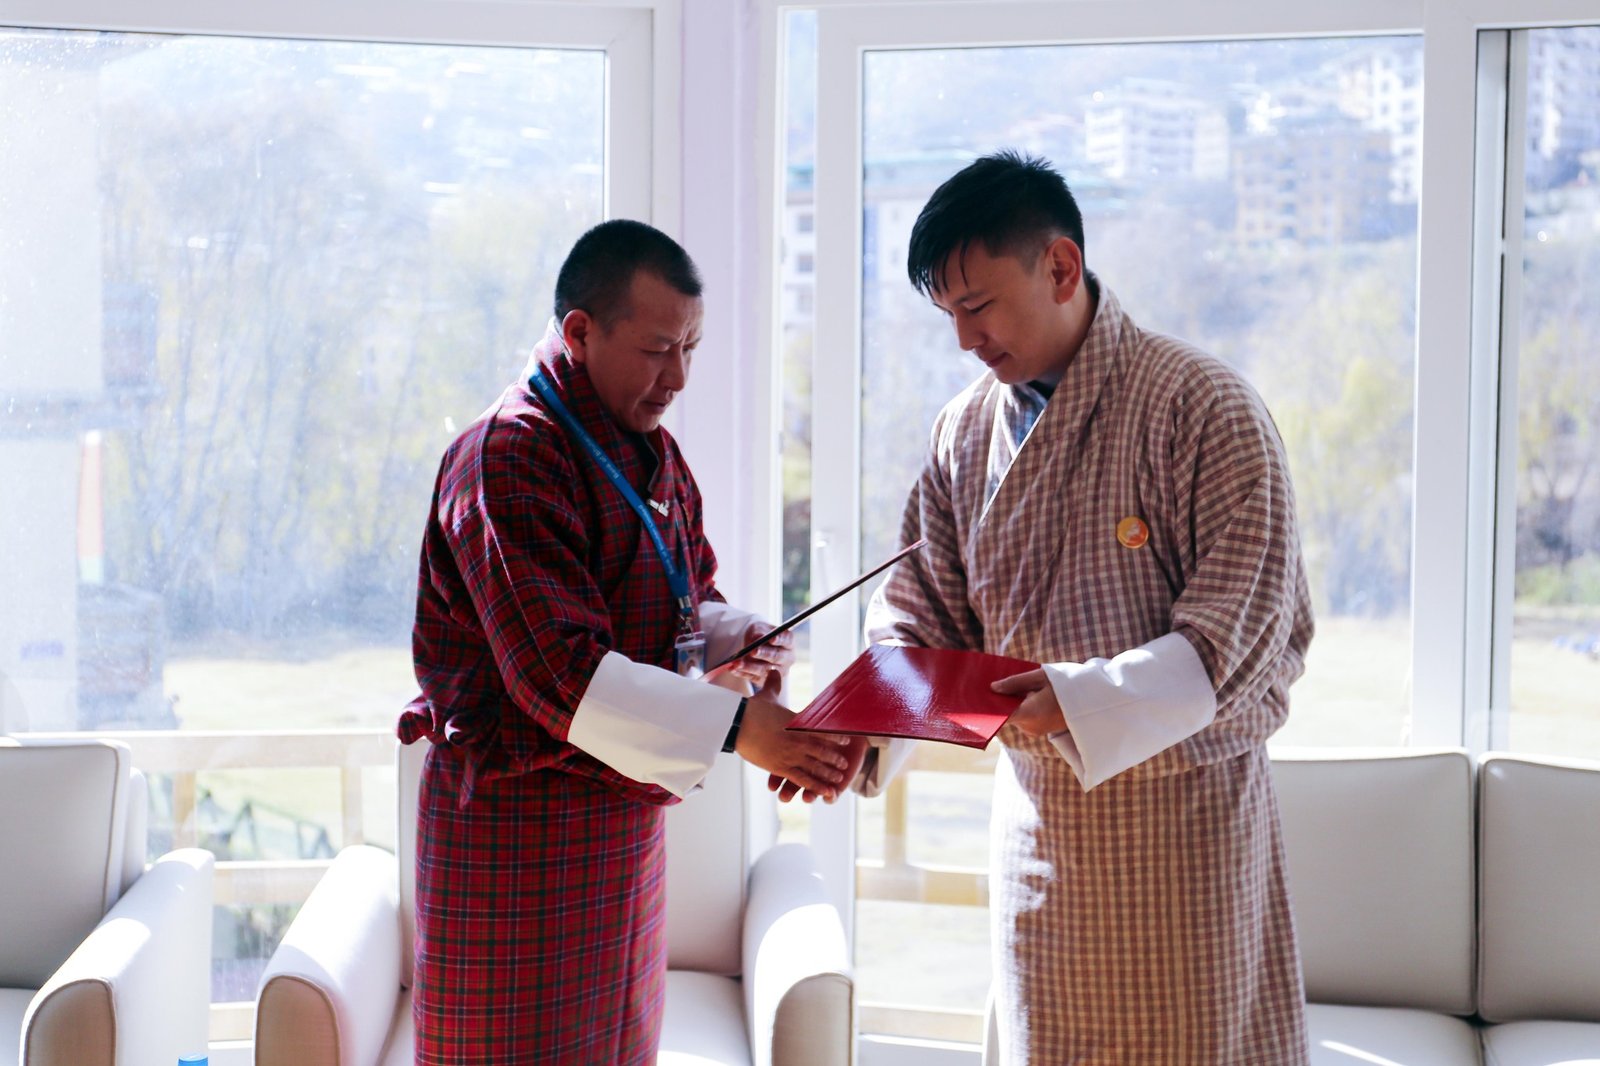 BoB signs new MoU with the Bhutan Football Federation